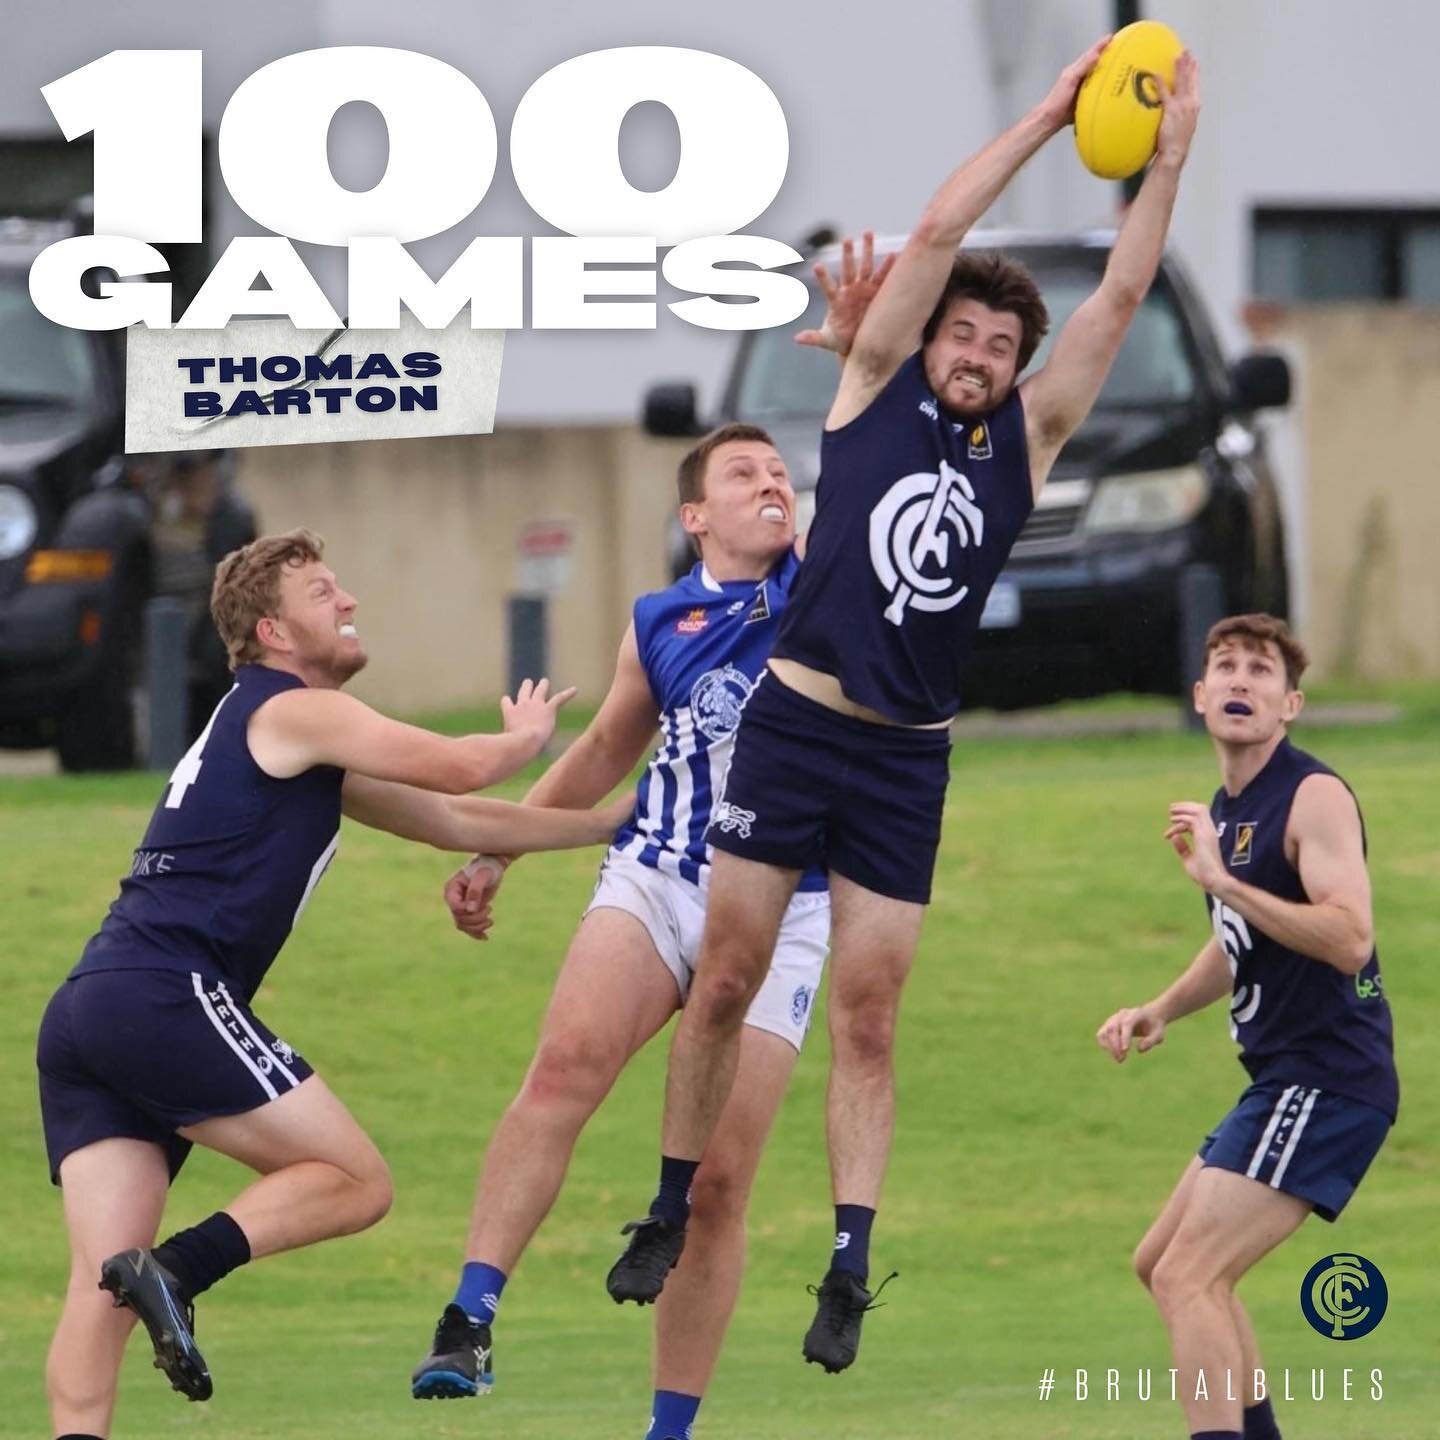 Congrats to @thomasbarton565 who will play his 100th game for the club this weekend for the Reserves side!!

Be sure to go down and support Barto at Kalamunda and celebrate this huge milestone ❗️